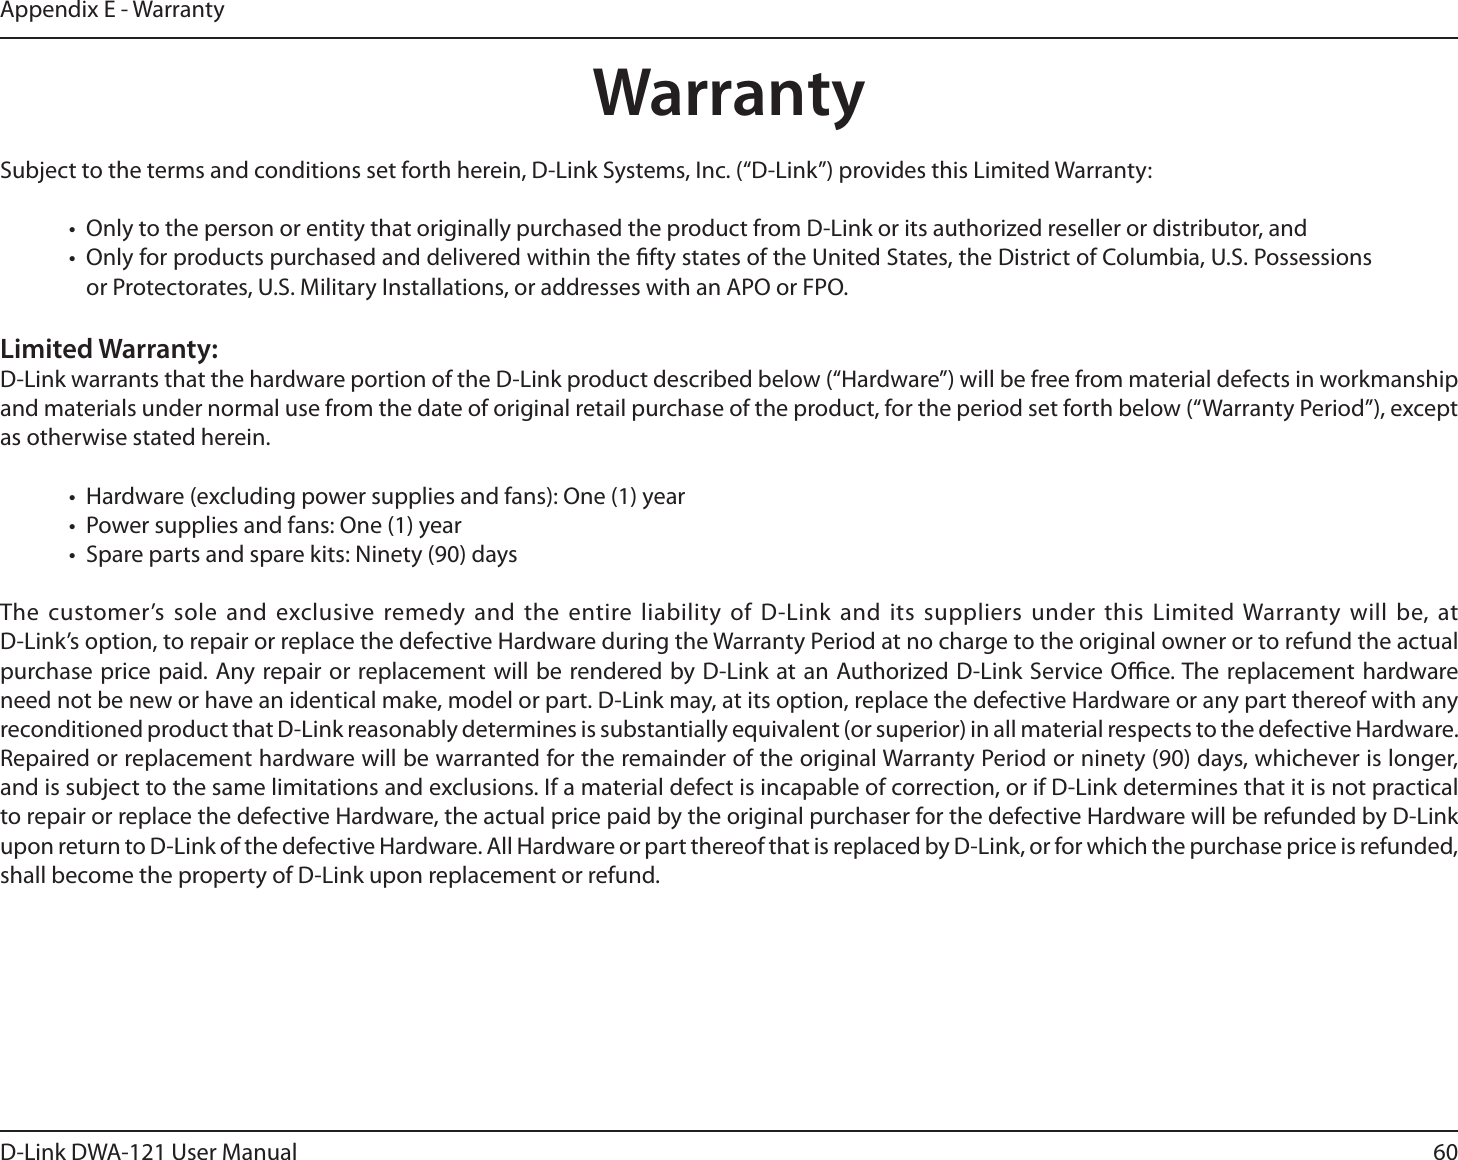 60D-Link DWA-121 User ManualAppendix E - WarrantyWarrantySubject to the terms and conditions set forth herein, D-Link Systems, Inc. (“D-Link”) provides this Limited Warranty:•  Only to the person or entity that originally purchased the product from D-Link or its authorized reseller or distributor, and•  Only for products purchased and delivered within the fty states of the United States, the District of Columbia, U.S. Possessions or Protectorates, U.S. Military Installations, or addresses with an APO or FPO.Limited Warranty:D-Link warrants that the hardware portion of the D-Link product described below (“Hardware”) will be free from material defects in workmanship and materials under normal use from the date of original retail purchase of the product, for the period set forth below (“Warranty Period”), except as otherwise stated herein.•  Hardware (excluding power supplies and fans): One (1) year•  Power supplies and fans: One (1) year•  Spare parts and spare kits: Ninety (90) daysThe customer’s sole and exclusive remedy and the entire liability of D-Link and its suppliers under this Limited Warranty will be, at  D-Link’s option, to repair or replace the defective Hardware during the Warranty Period at no charge to the original owner or to refund the actual purchase price paid. Any repair or replacement will be rendered by D-Link at an Authorized D-Link Service Oce. The replacement hardware need not be new or have an identical make, model or part. D-Link may, at its option, replace the defective Hardware or any part thereof with any reconditioned product that D-Link reasonably determines is substantially equivalent (or superior) in all material respects to the defective Hardware. Repaired or replacement hardware will be warranted for the remainder of the original Warranty Period or ninety (90) days, whichever is longer, and is subject to the same limitations and exclusions. If a material defect is incapable of correction, or if D-Link determines that it is not practical to repair or replace the defective Hardware, the actual price paid by the original purchaser for the defective Hardware will be refunded by D-Link upon return to D-Link of the defective Hardware. All Hardware or part thereof that is replaced by D-Link, or for which the purchase price is refunded, shall become the property of D-Link upon replacement or refund.